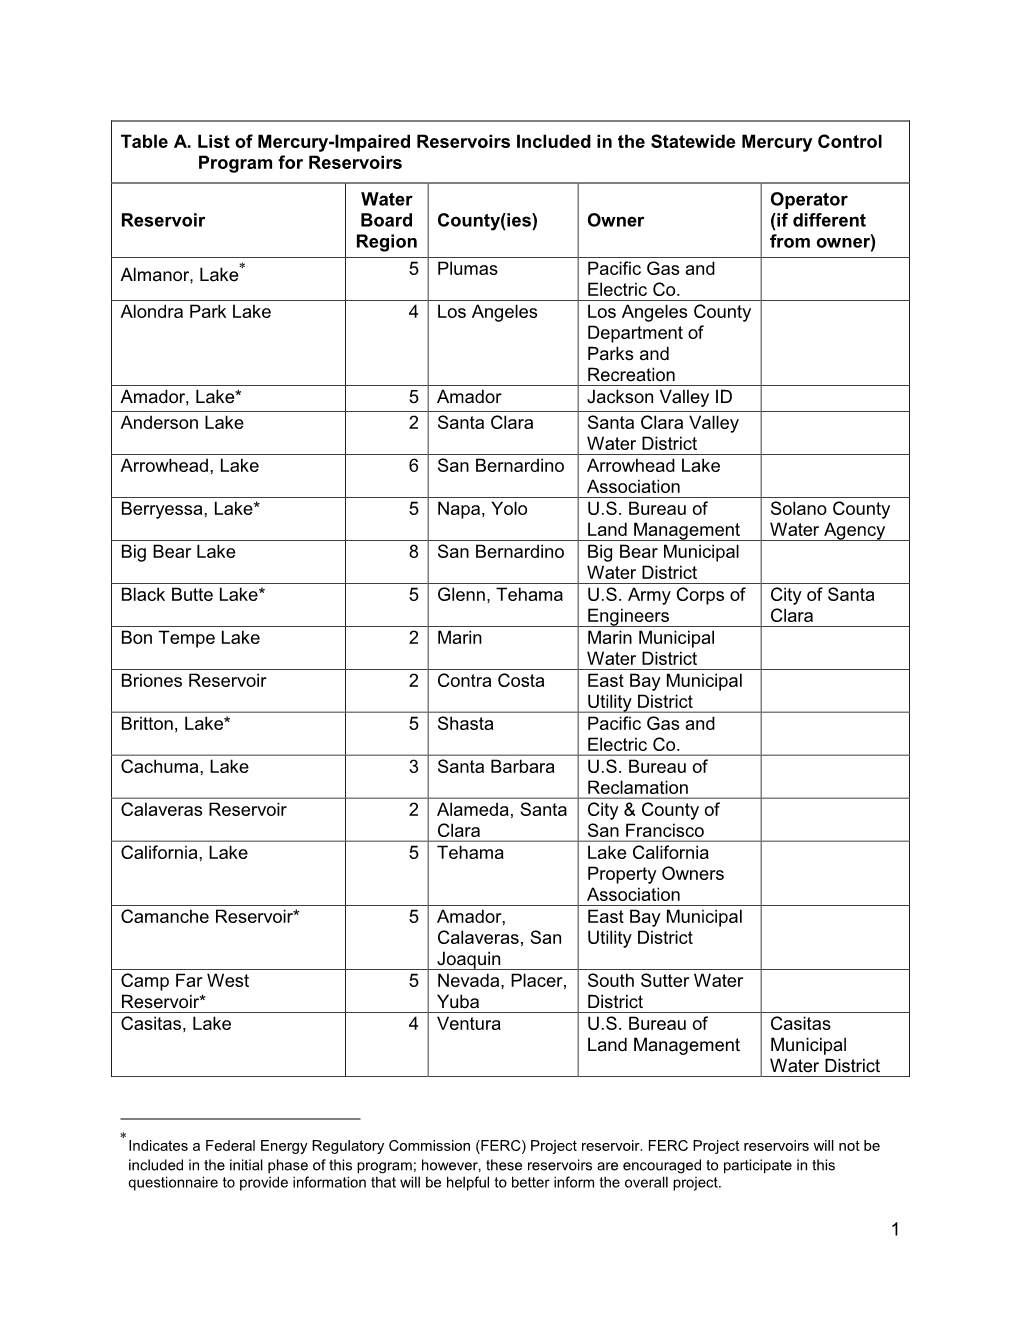 1 Table A. List of Mercury-Impaired Reservoirs Included in The